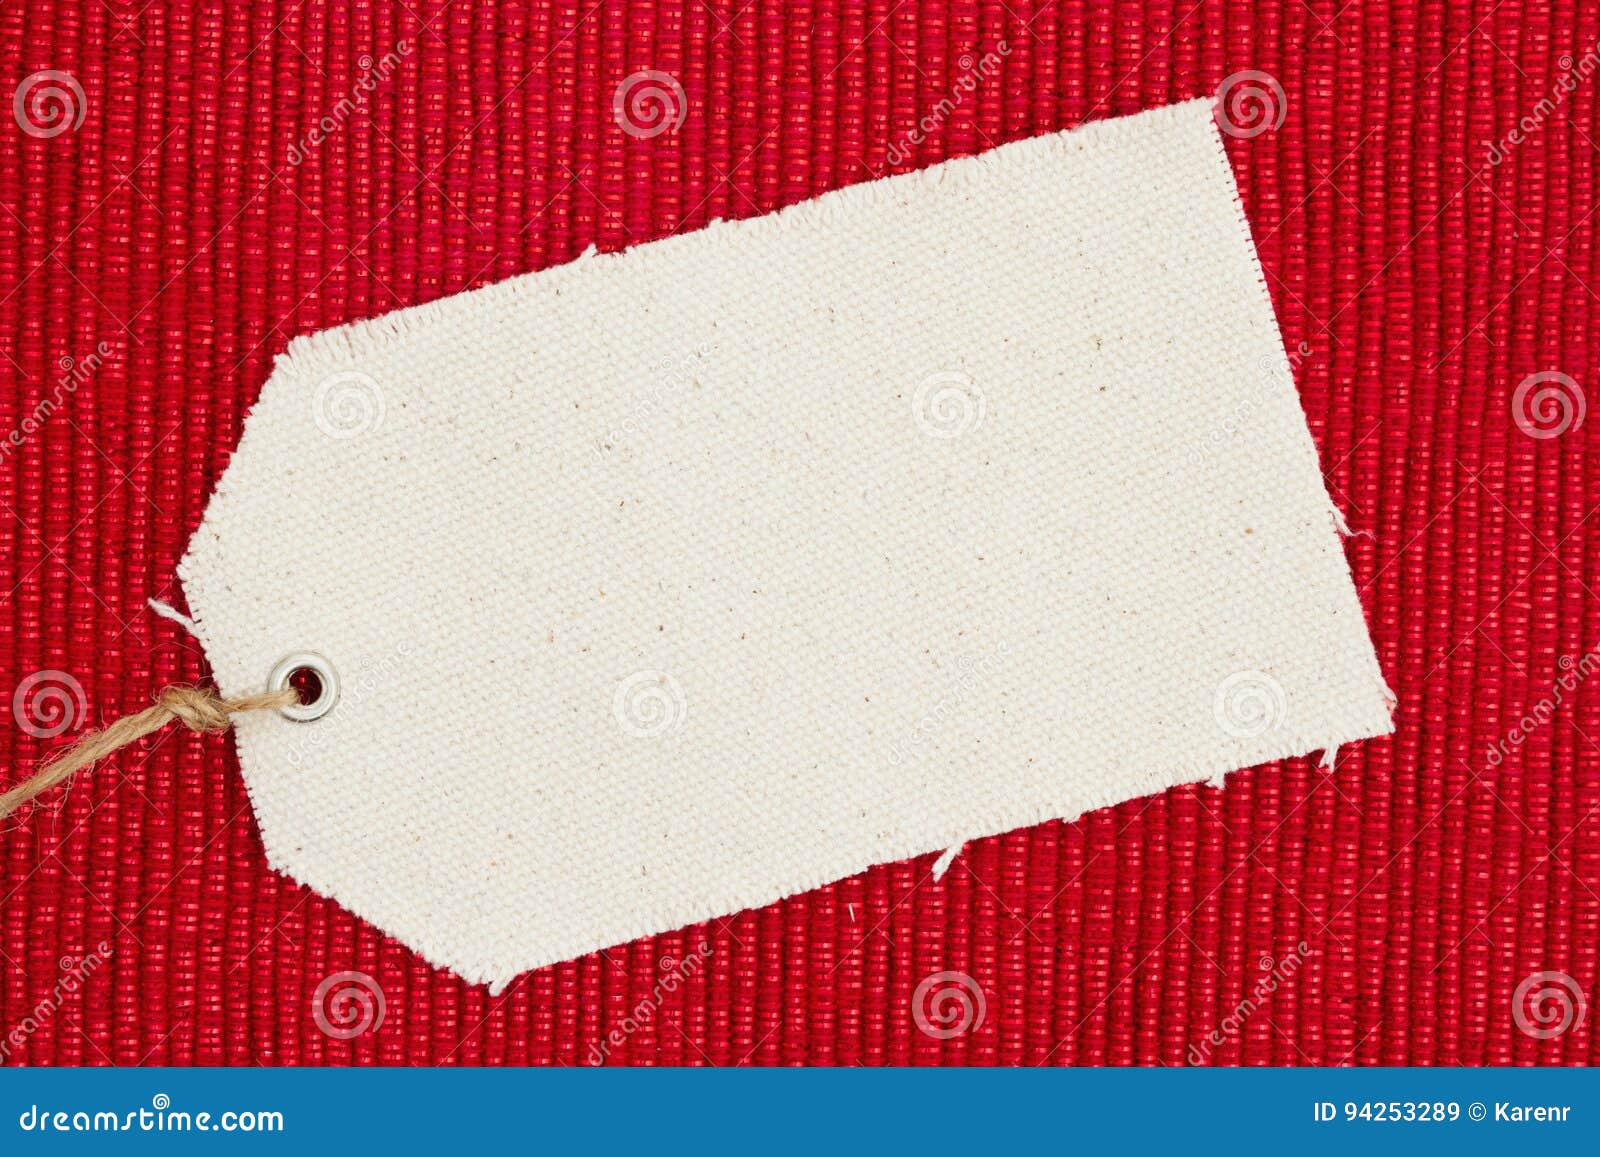 a cloth gift tag on shiny red material